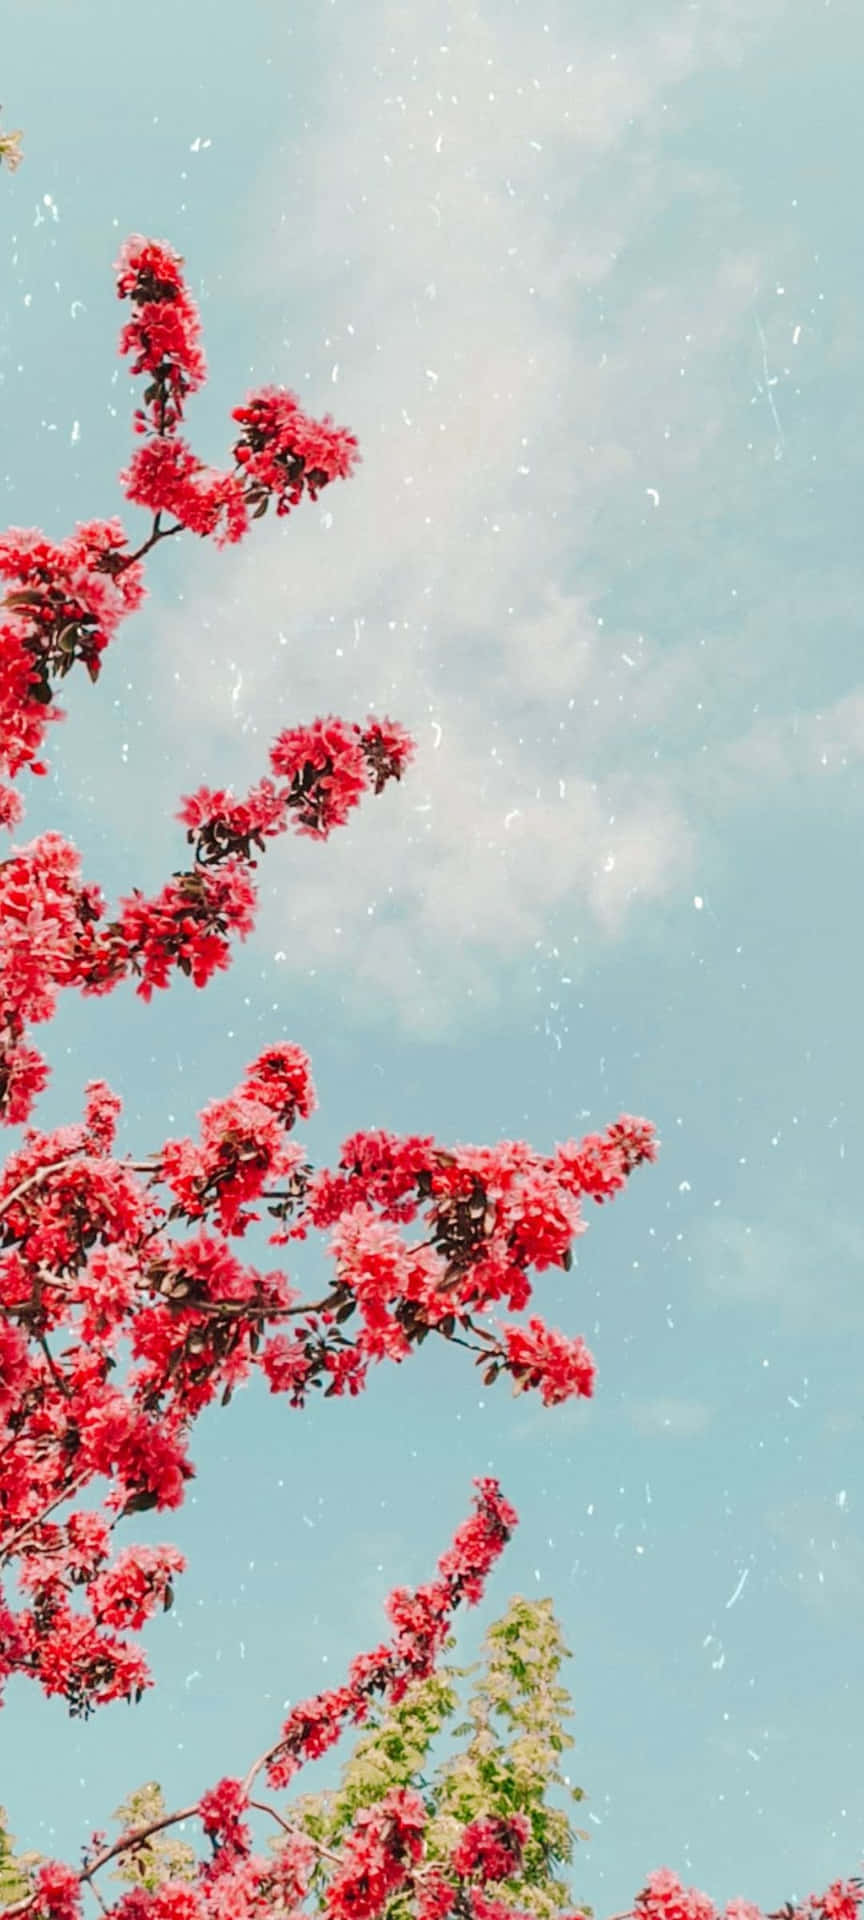 Blossoming Red Flowers Against Blue Sky Wallpaper